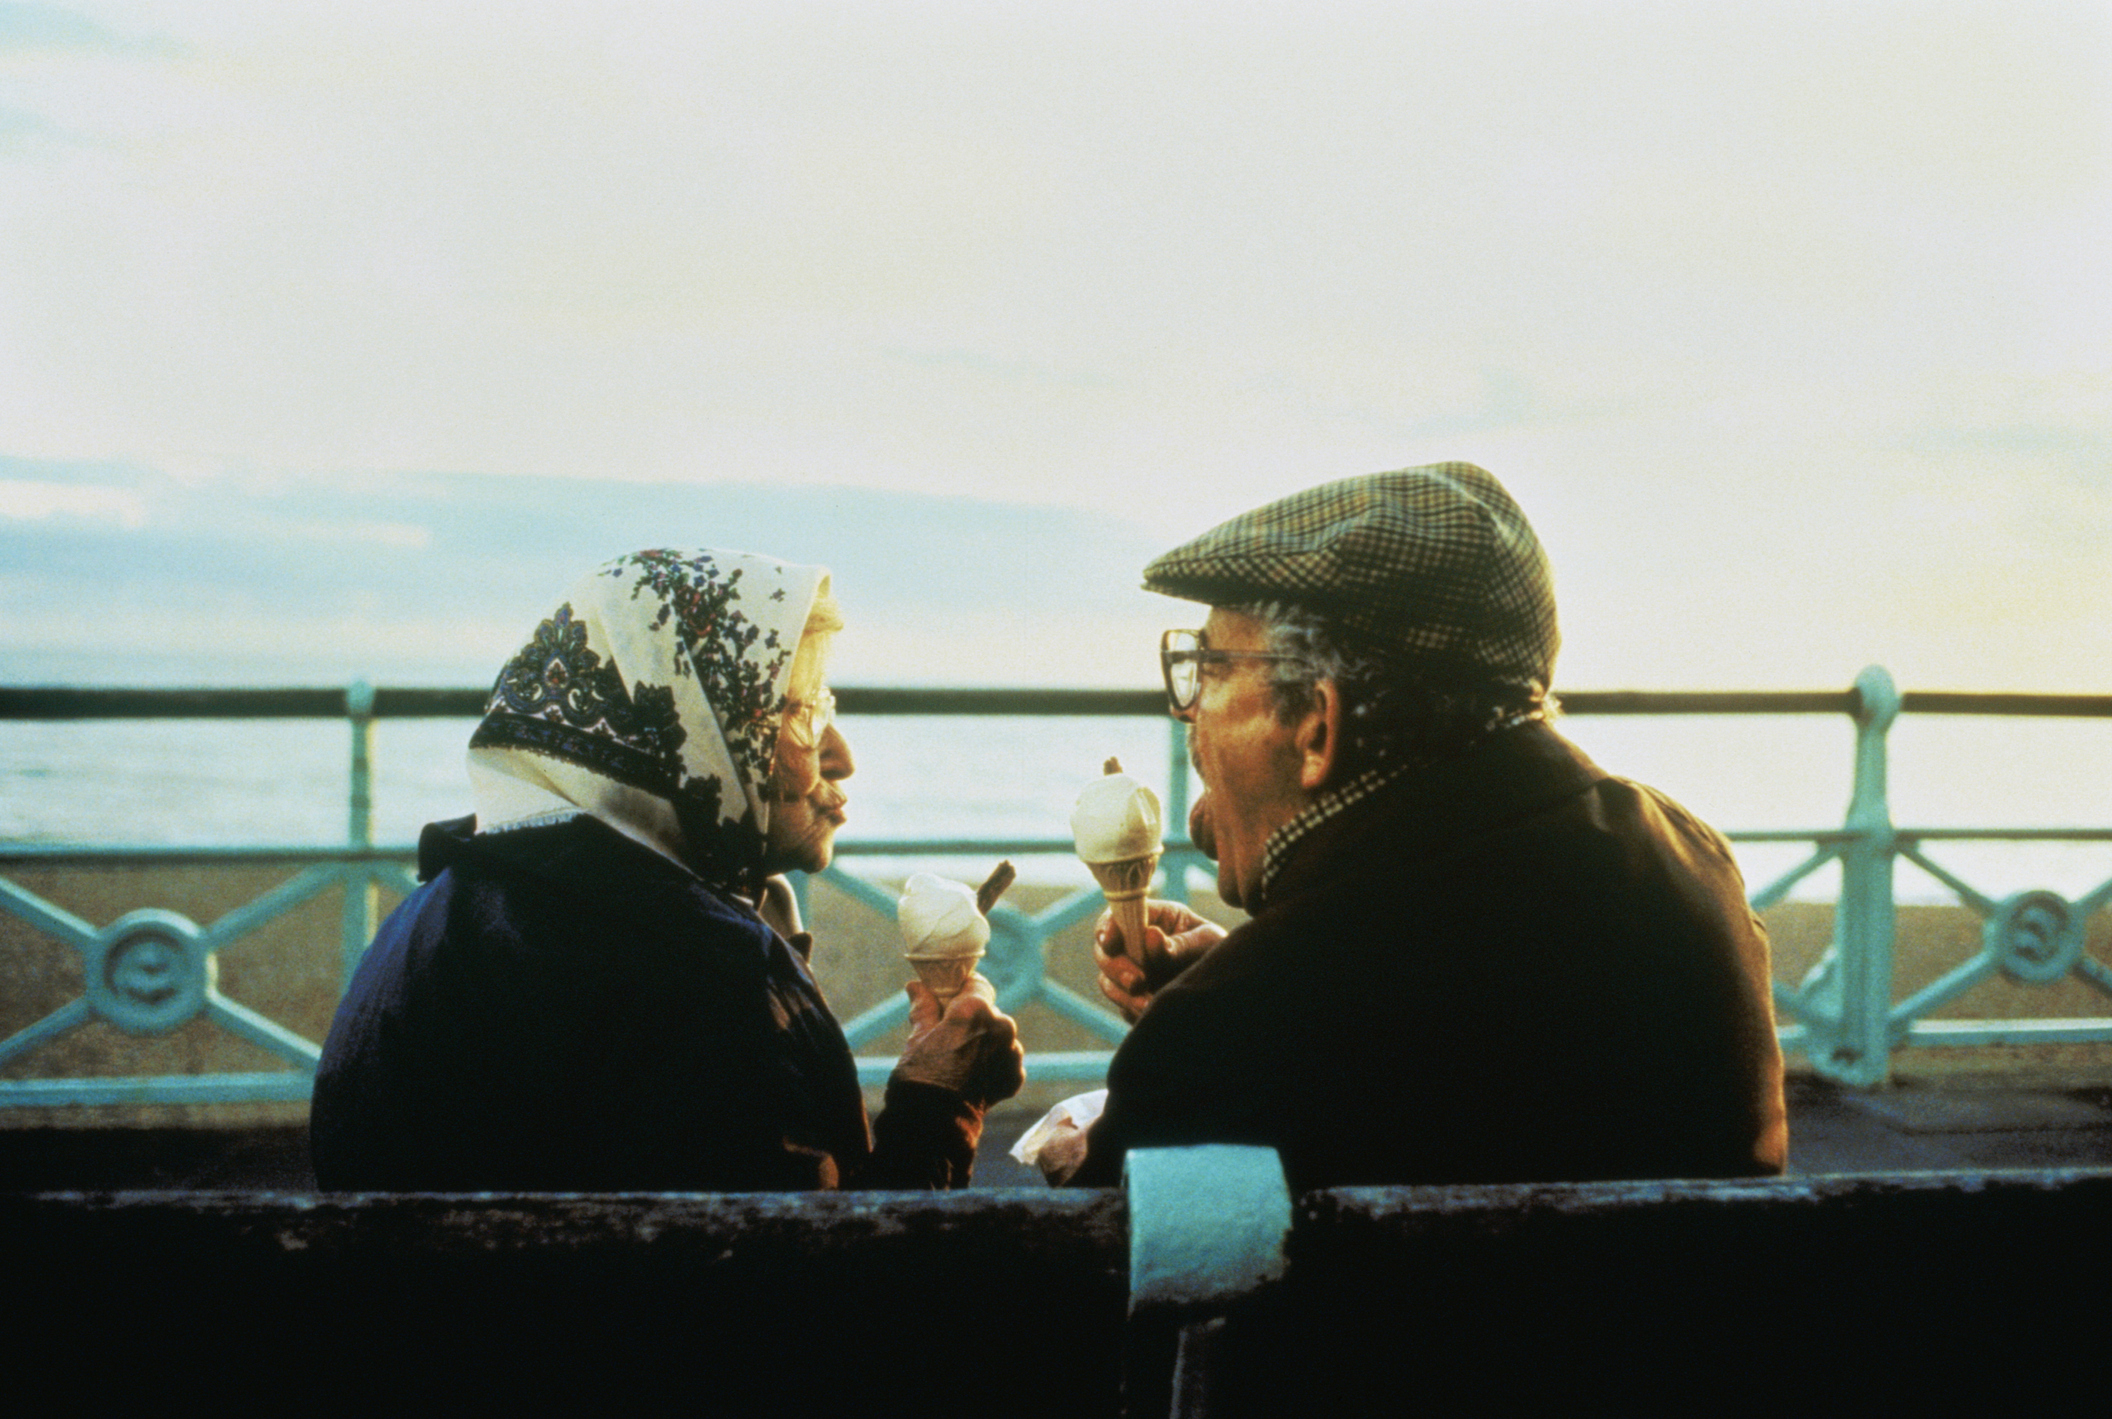 An elderly couple sits on a bench by the seaside, sharing ice cream and engaging in conversation